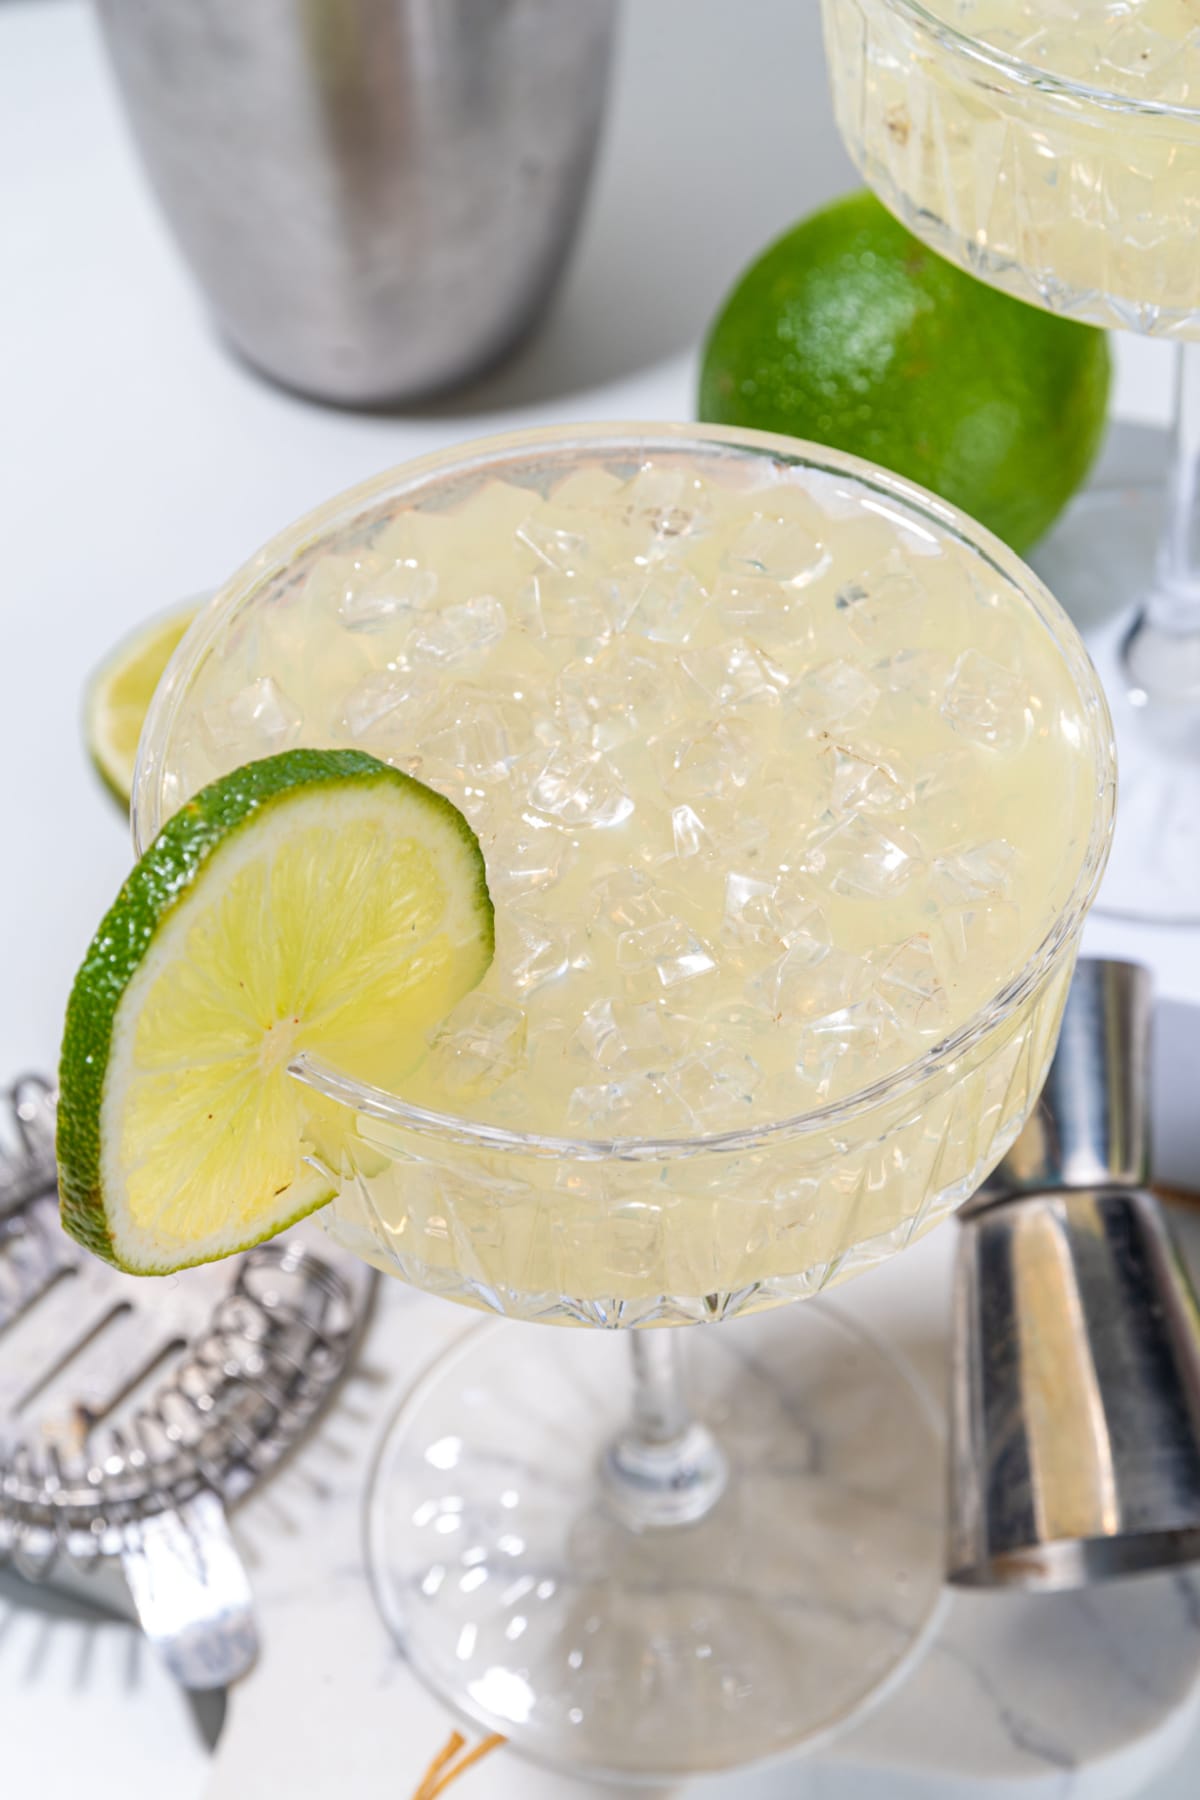 A refreshing glass of gimlet cocktail, filled to the brim with tangy citrus flavors and garnished with lemon wheel on the rim